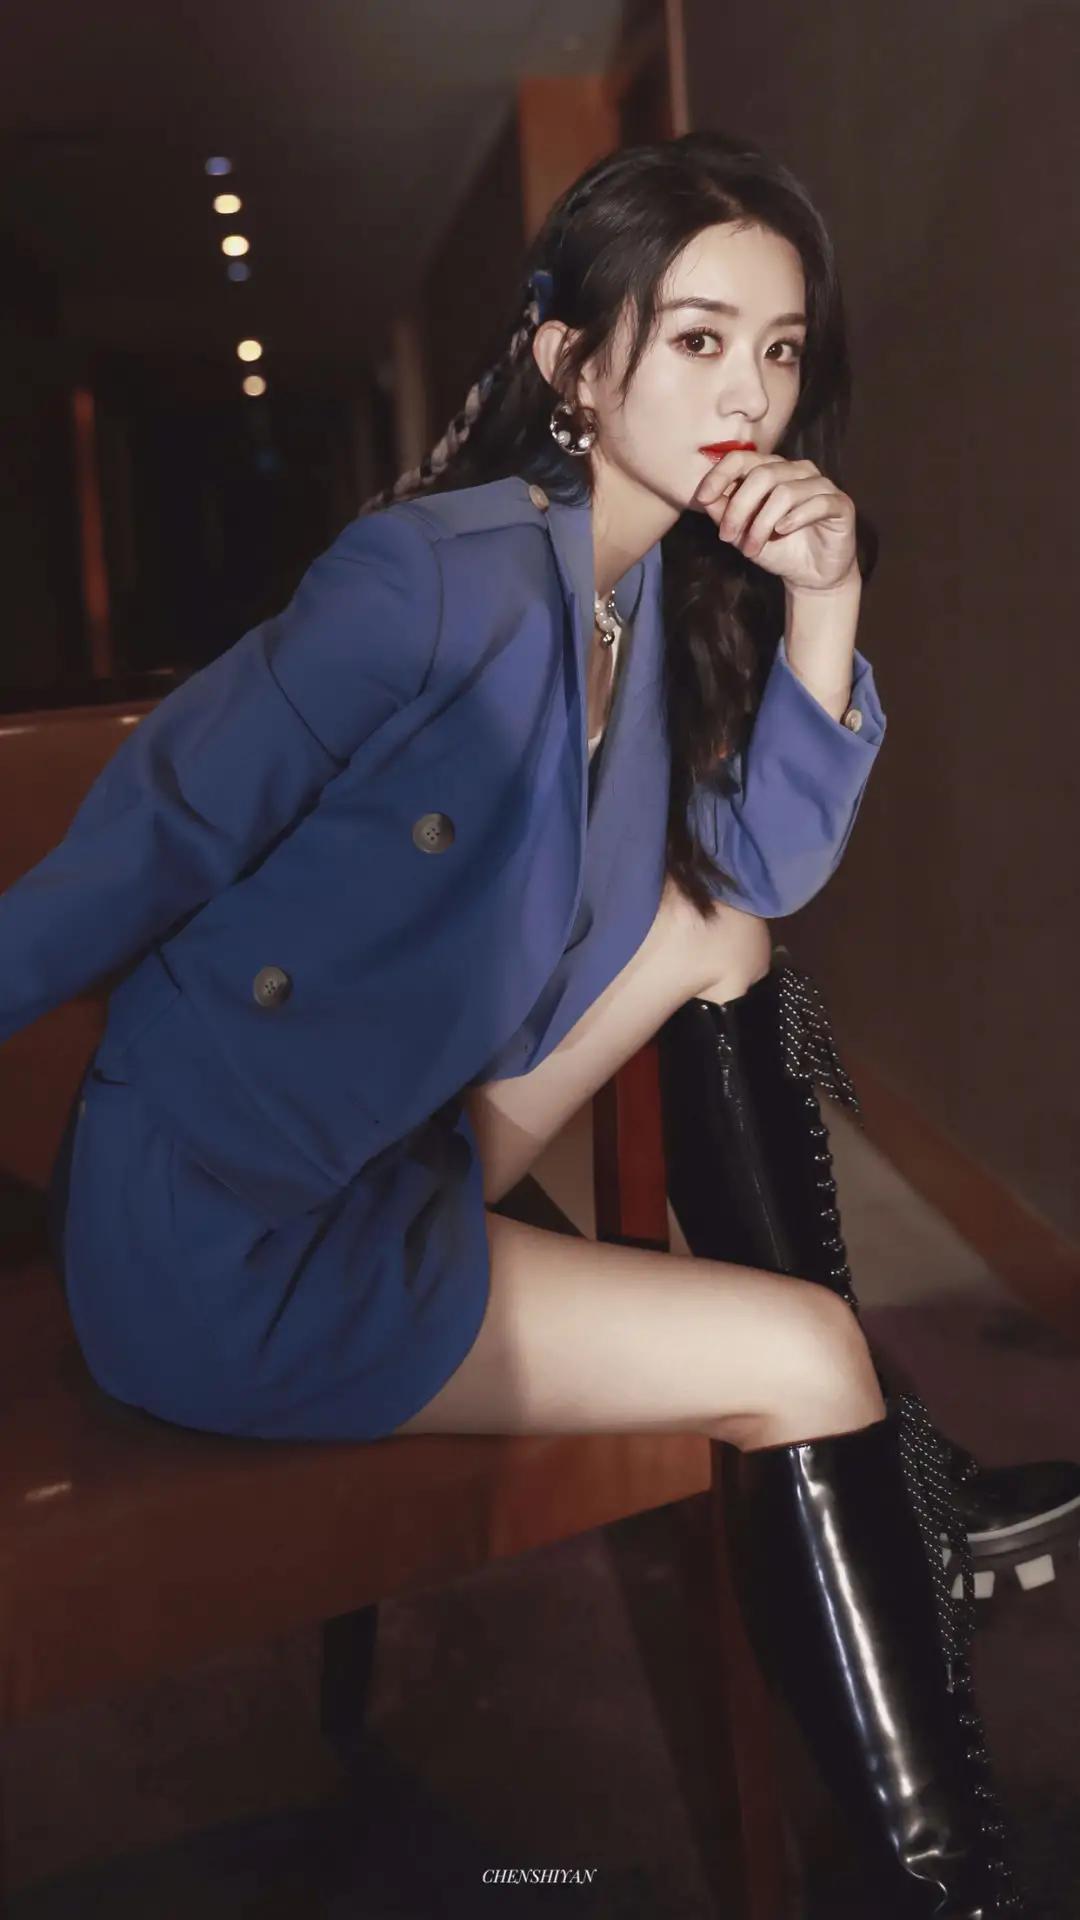 Zhao Liying's legs are super thin, - iNEWS